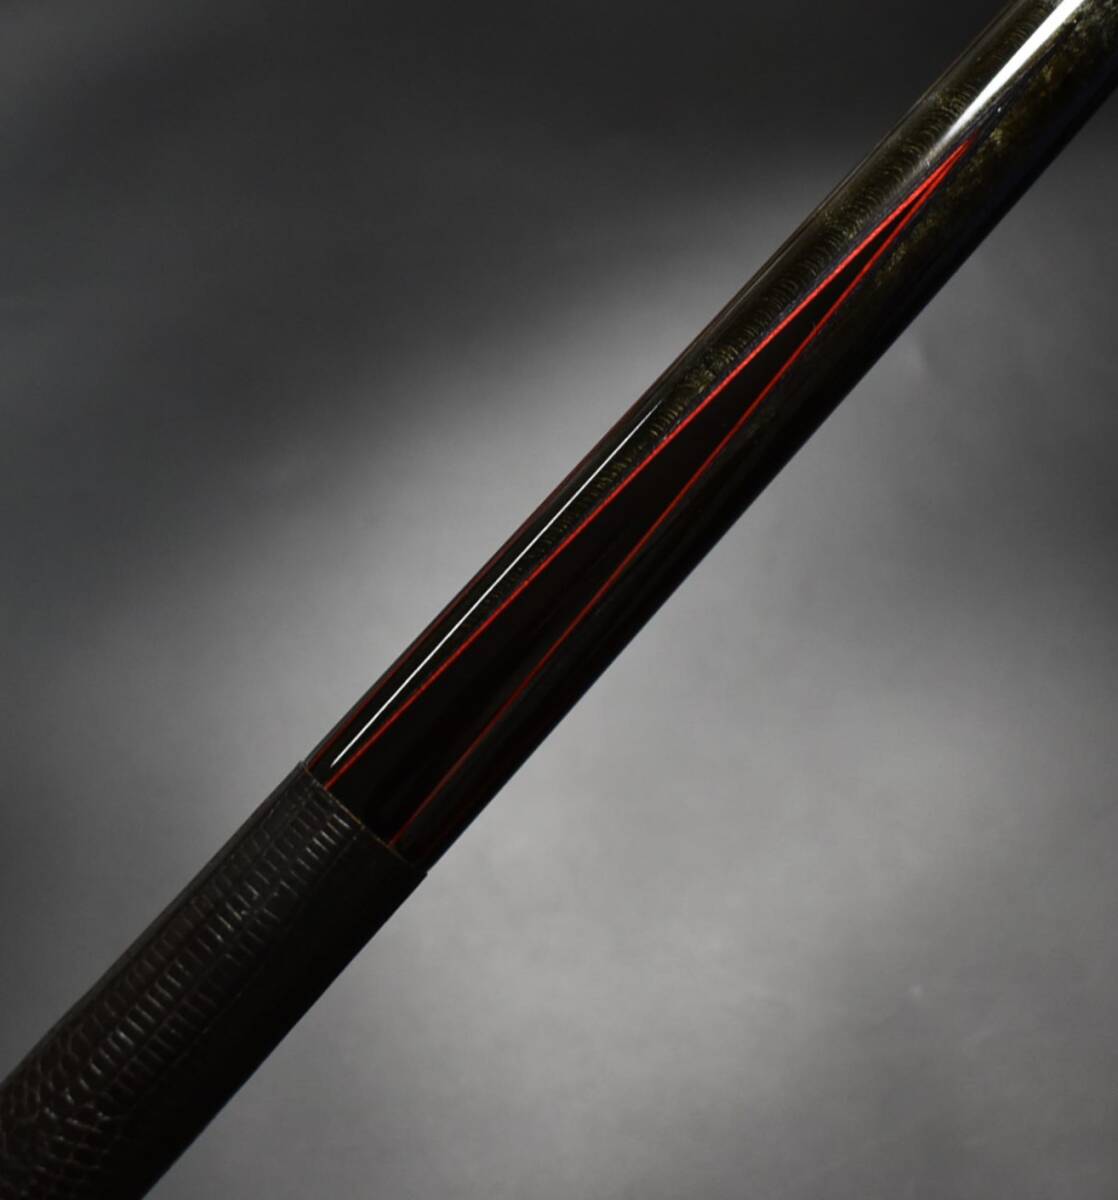 *old Meucci Cue [97-10]meuchi18 mountain Lizard original leather joint protector attached 